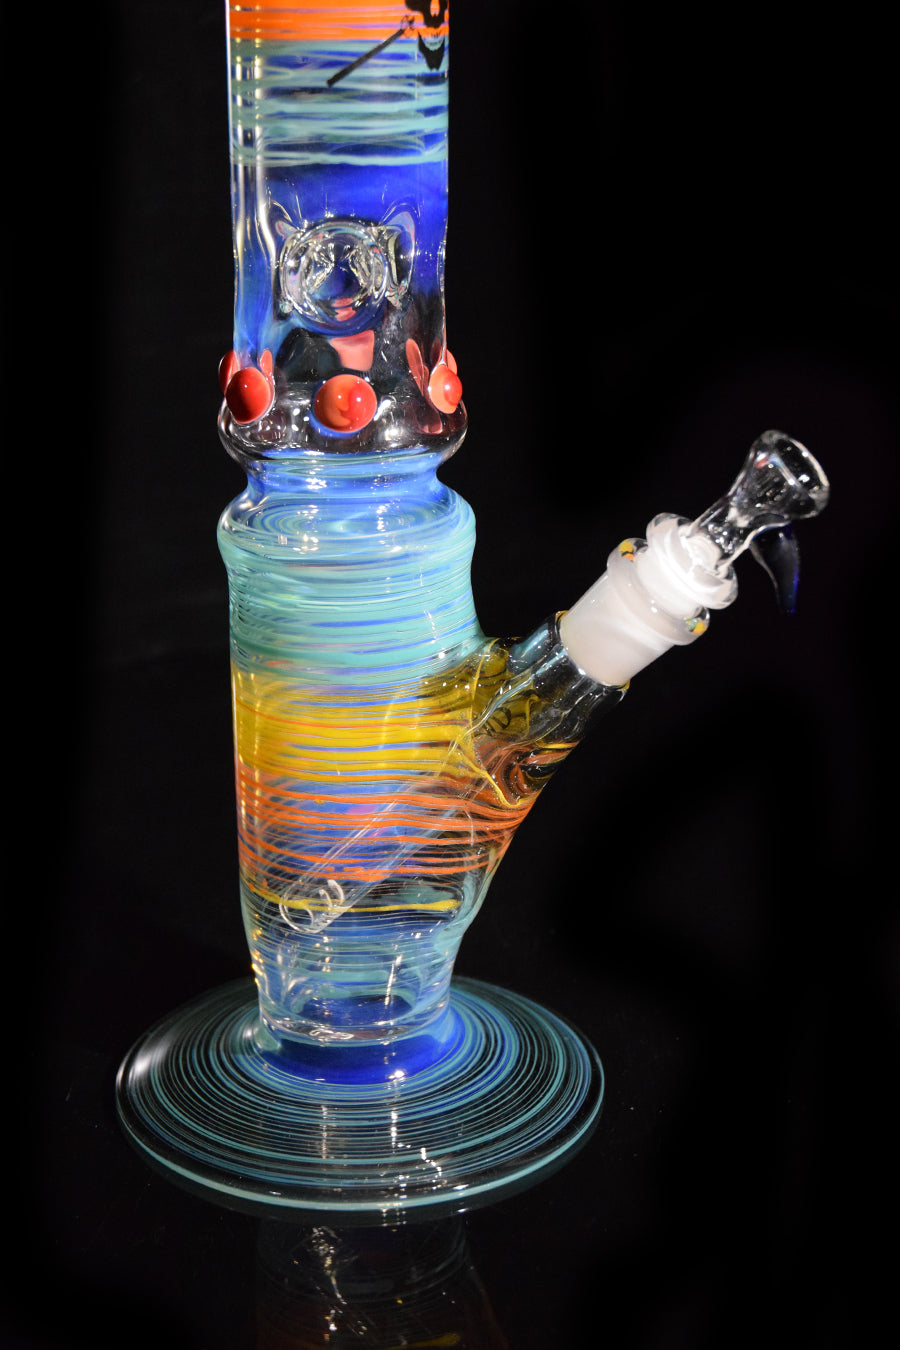 Colorful Band Wrapped Bong in Old School Style by Phil Sundling 